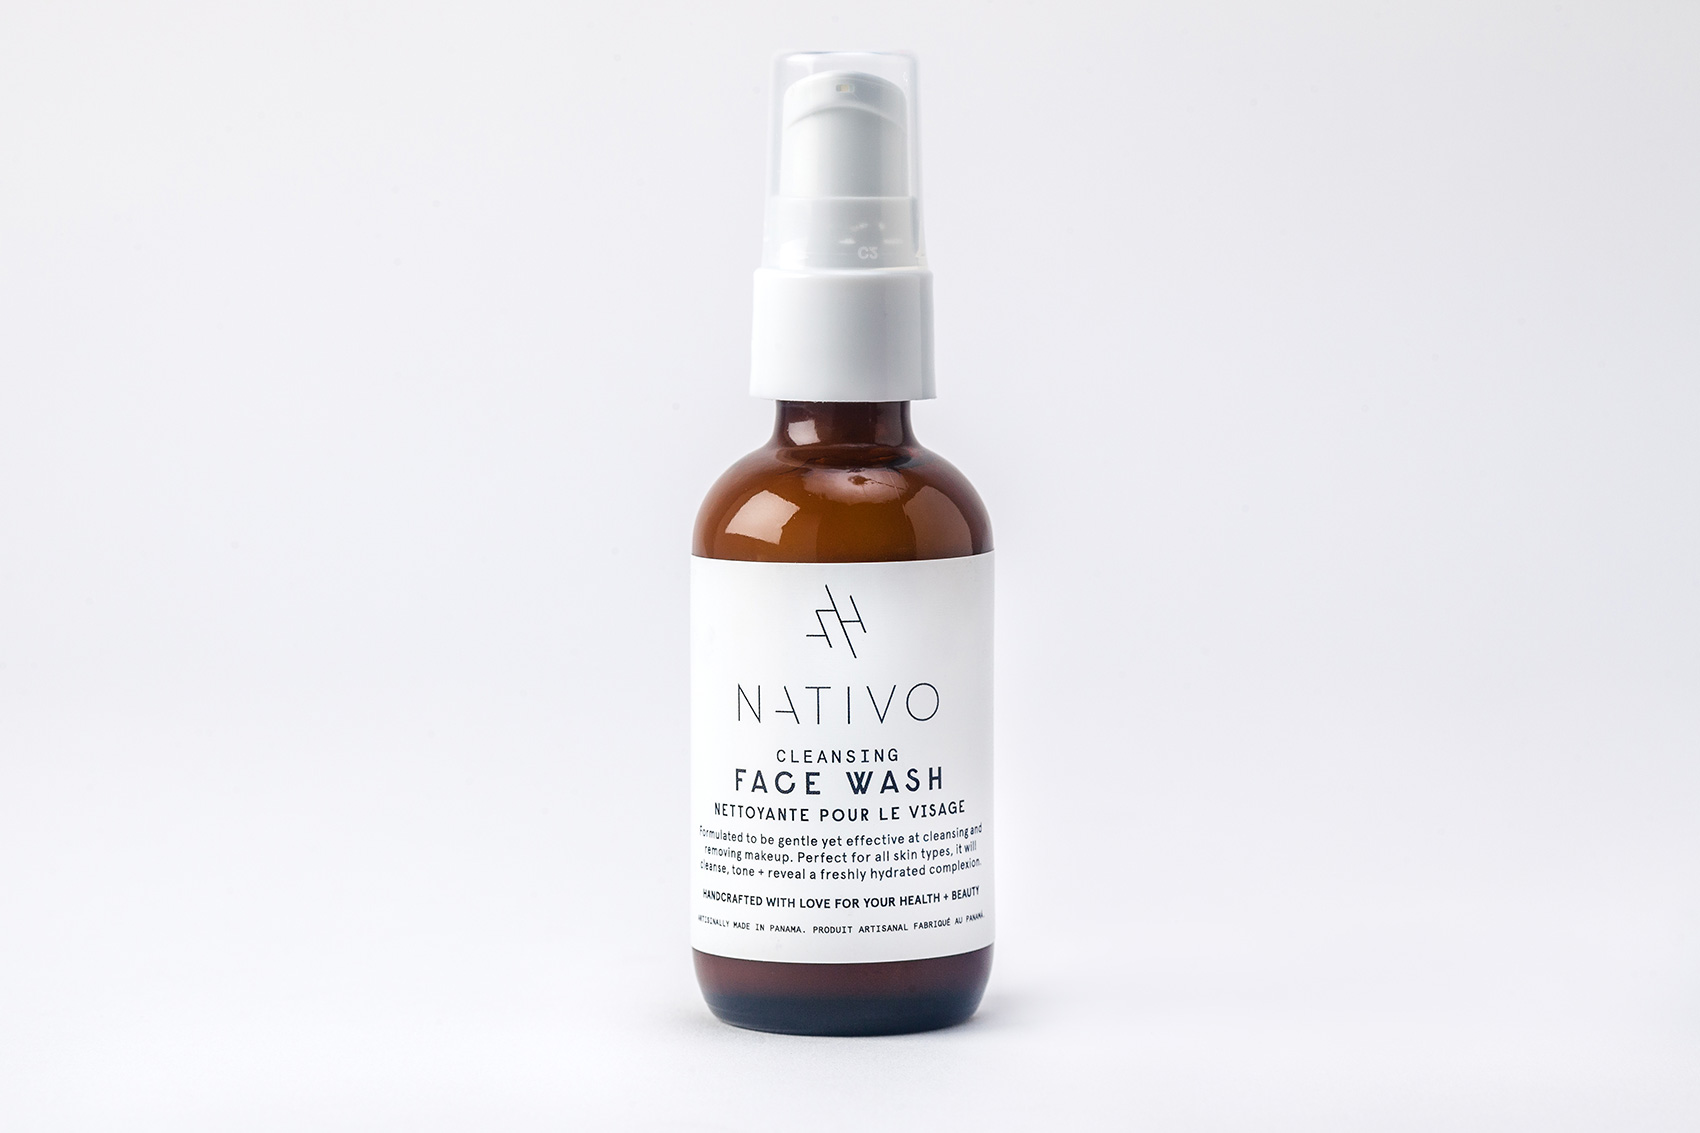 Simple, clean, minimal, monochromatic package and label design for an artisanal organic beauty and skincare brand Nativo by graphic designer and art director Maristella Gonzalez of Stellar Design & Direction